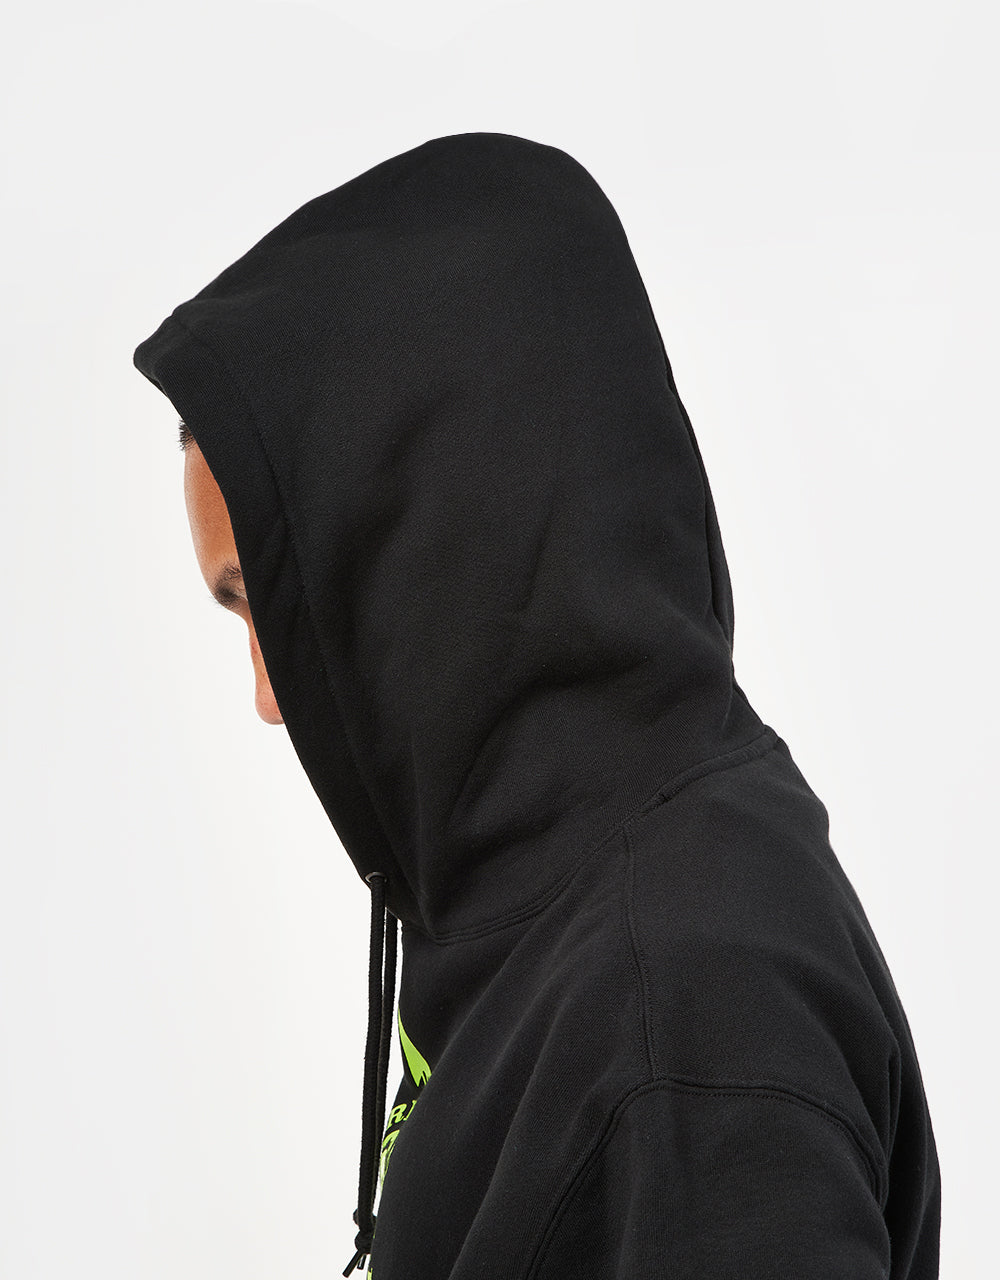 HUF x Cypress Hill Blunted Compass Pullover Hoodie - Black